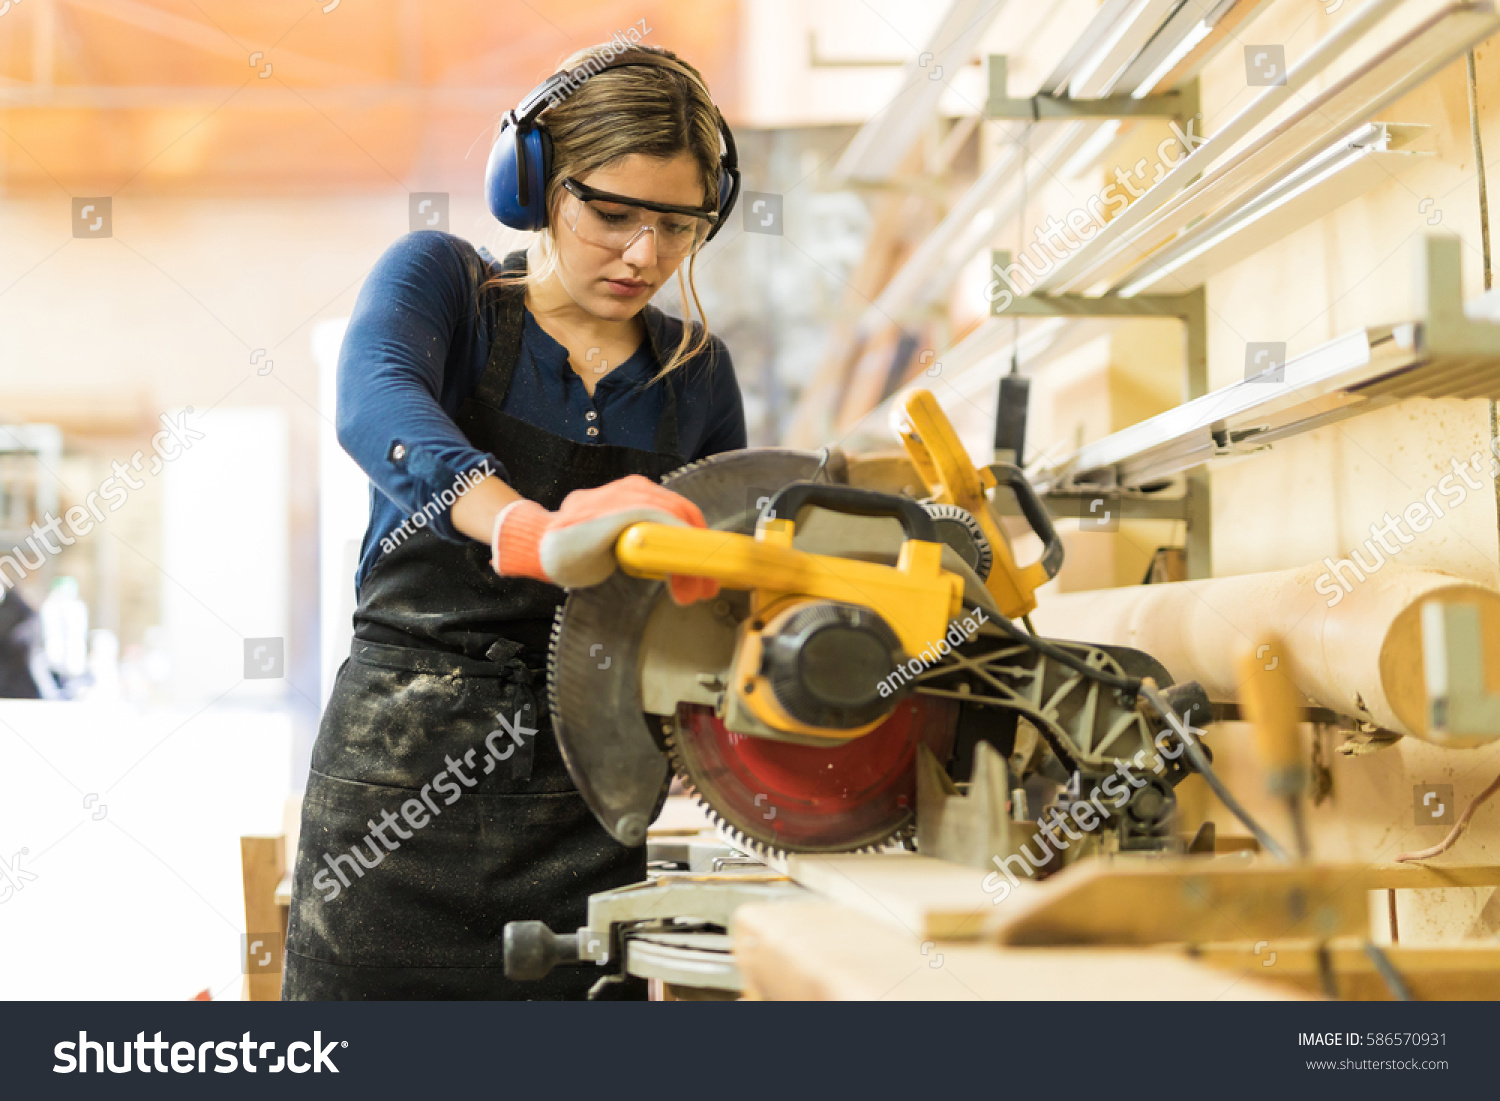 Attractive female carpenter using some power tools for her work in a woodshop #586570931